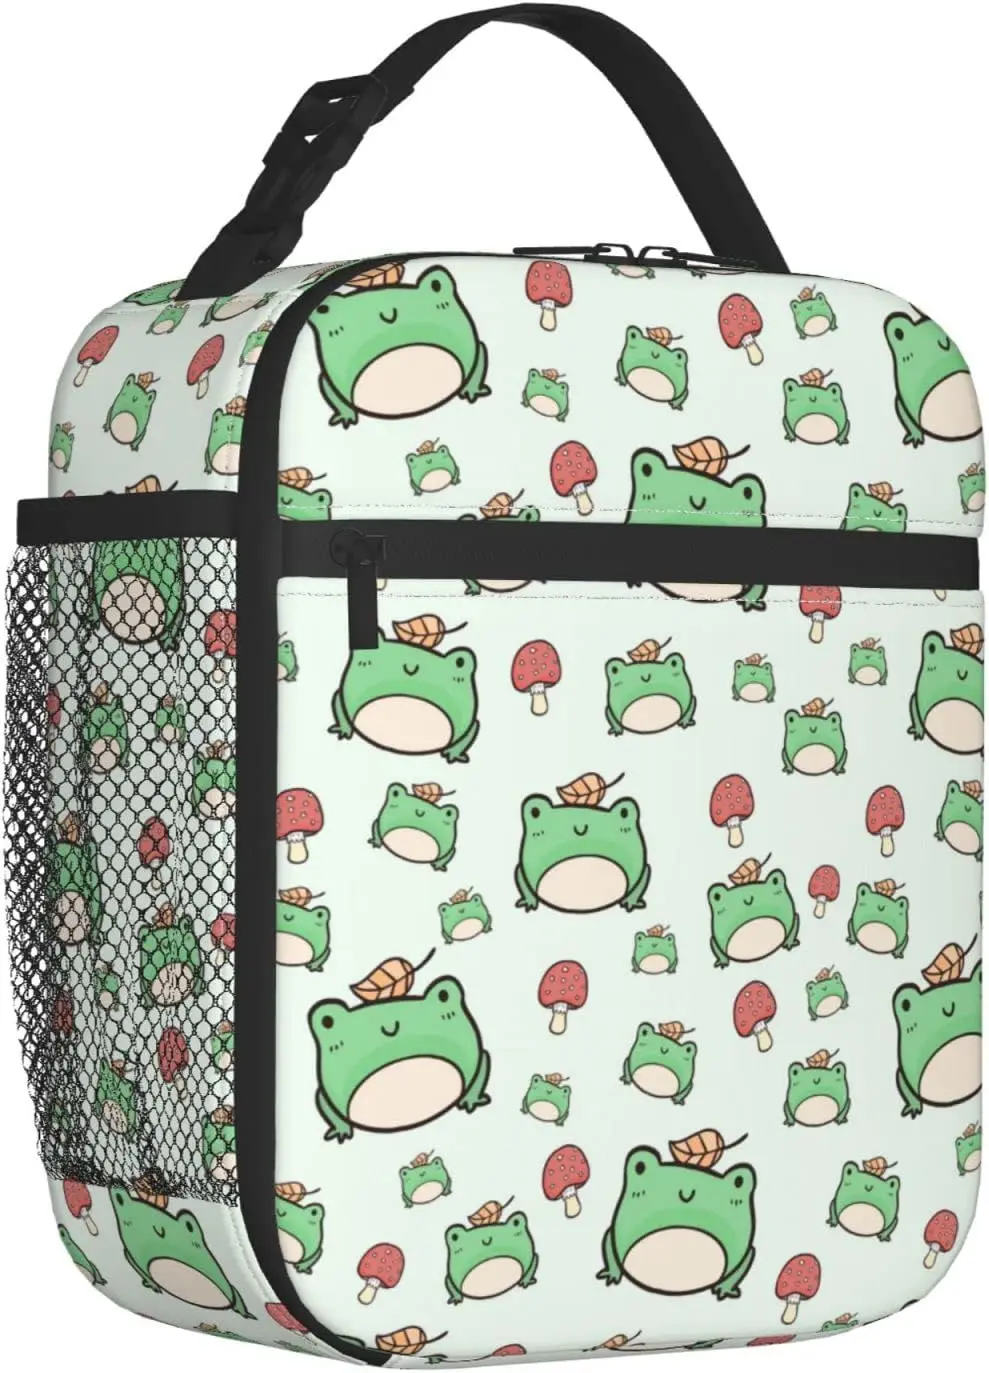 

Cute Frog Lunch Bag For Women Men Leakproof Cooler Tote Bags Reusable Insulated Lunchbox For Office Work School Picnic Travel